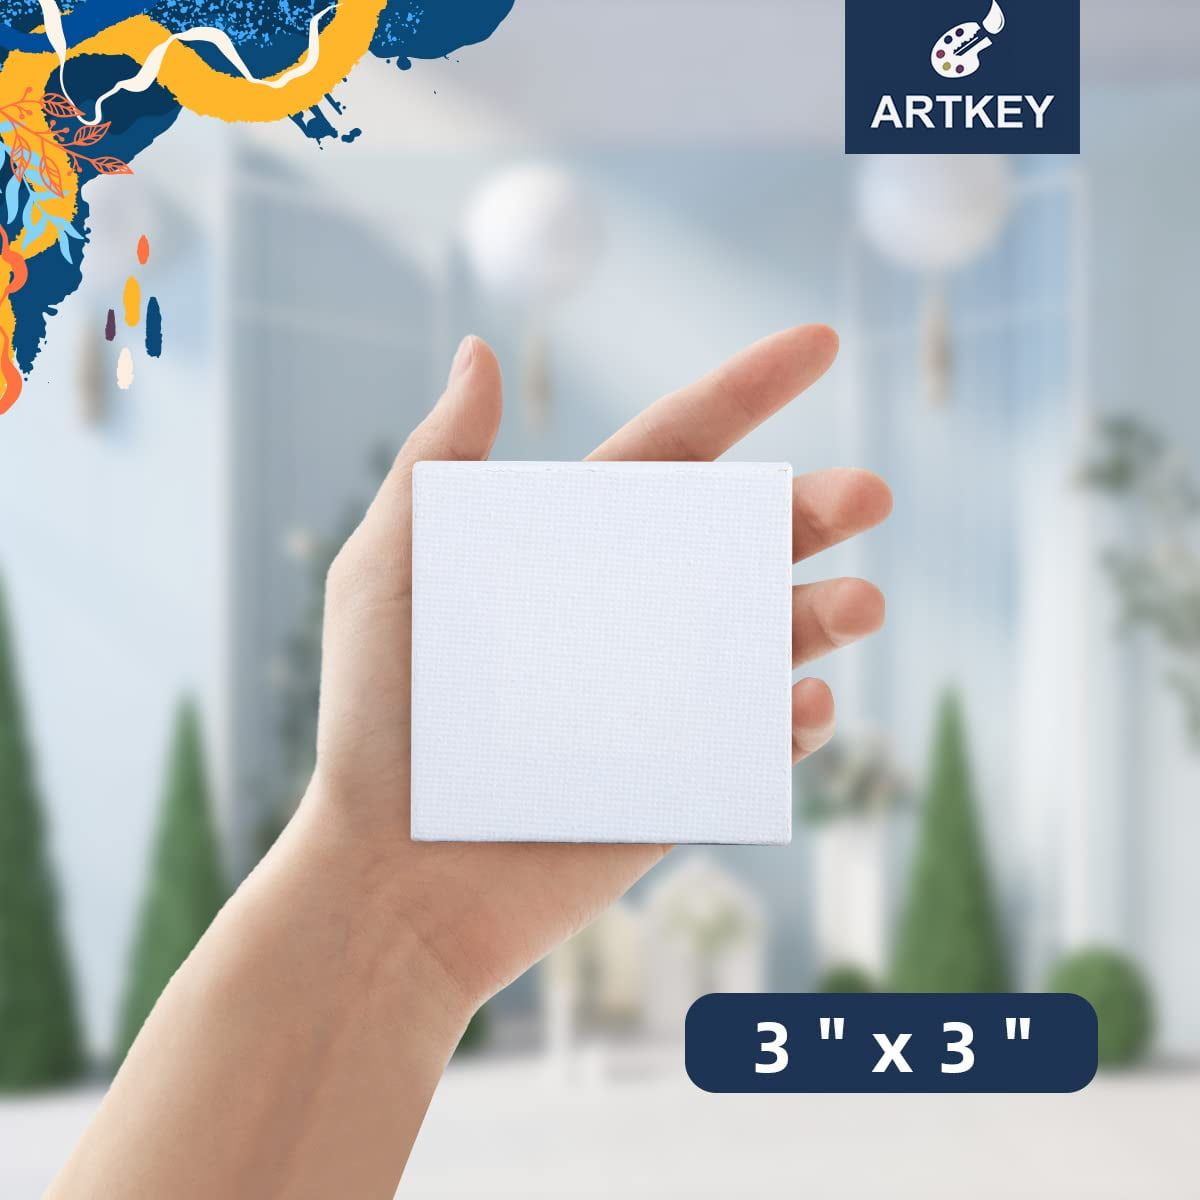 Artkey Mini Canvas, 4x4 inch 24-Pack Small Canvases Bangladesh